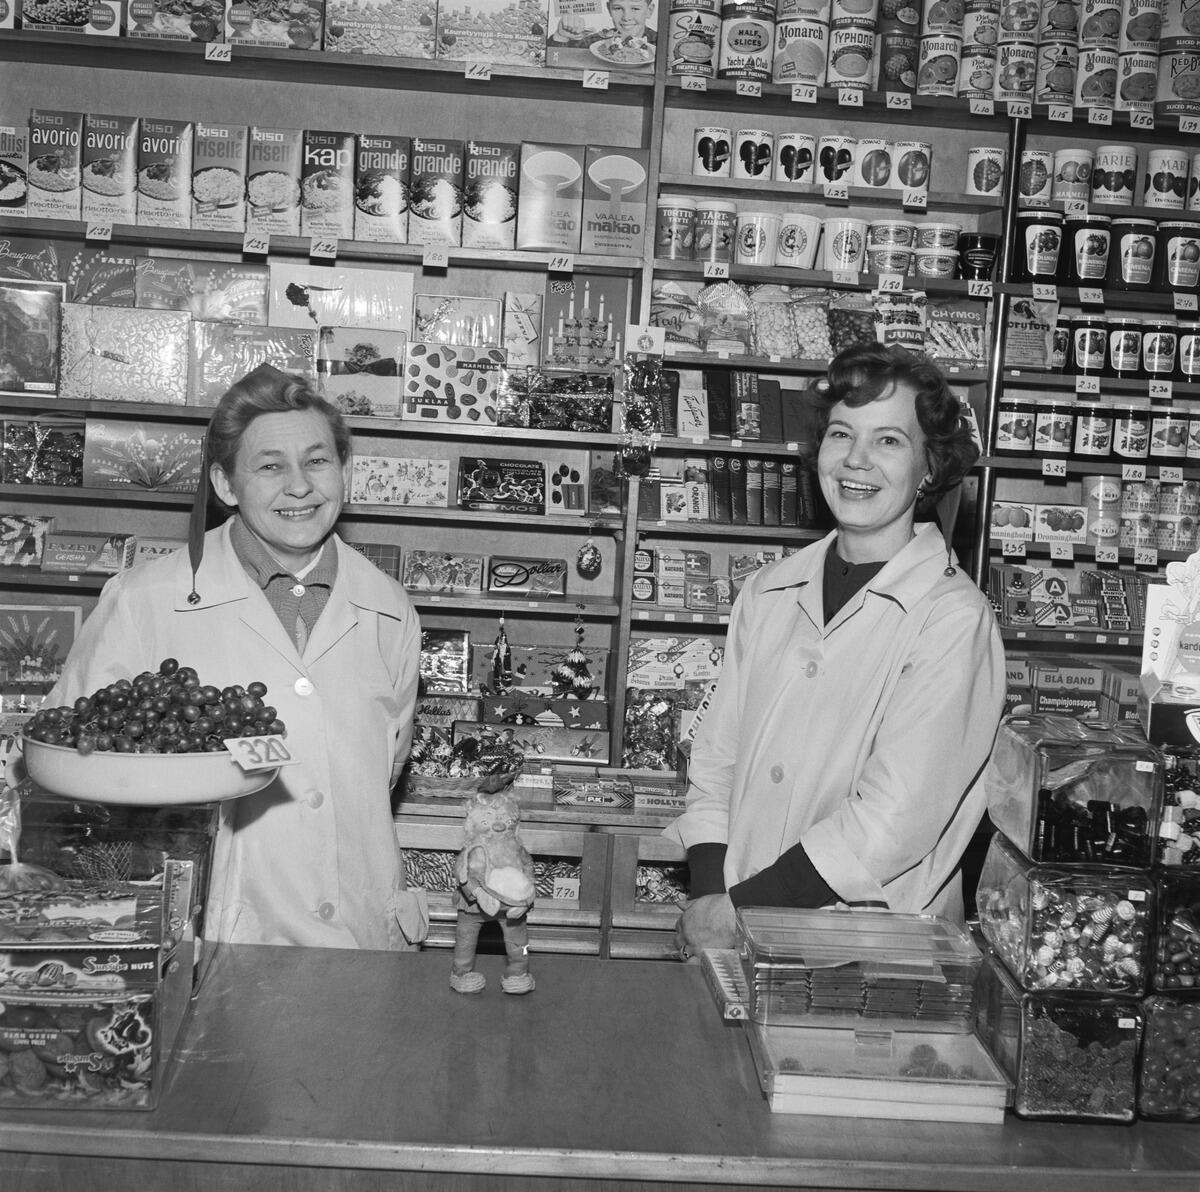 Mixed goods trade at Katajanokka in 1964. Freshly arrived Christmas delicacies put a smile on the grocery store vendors’ faces in 1964.